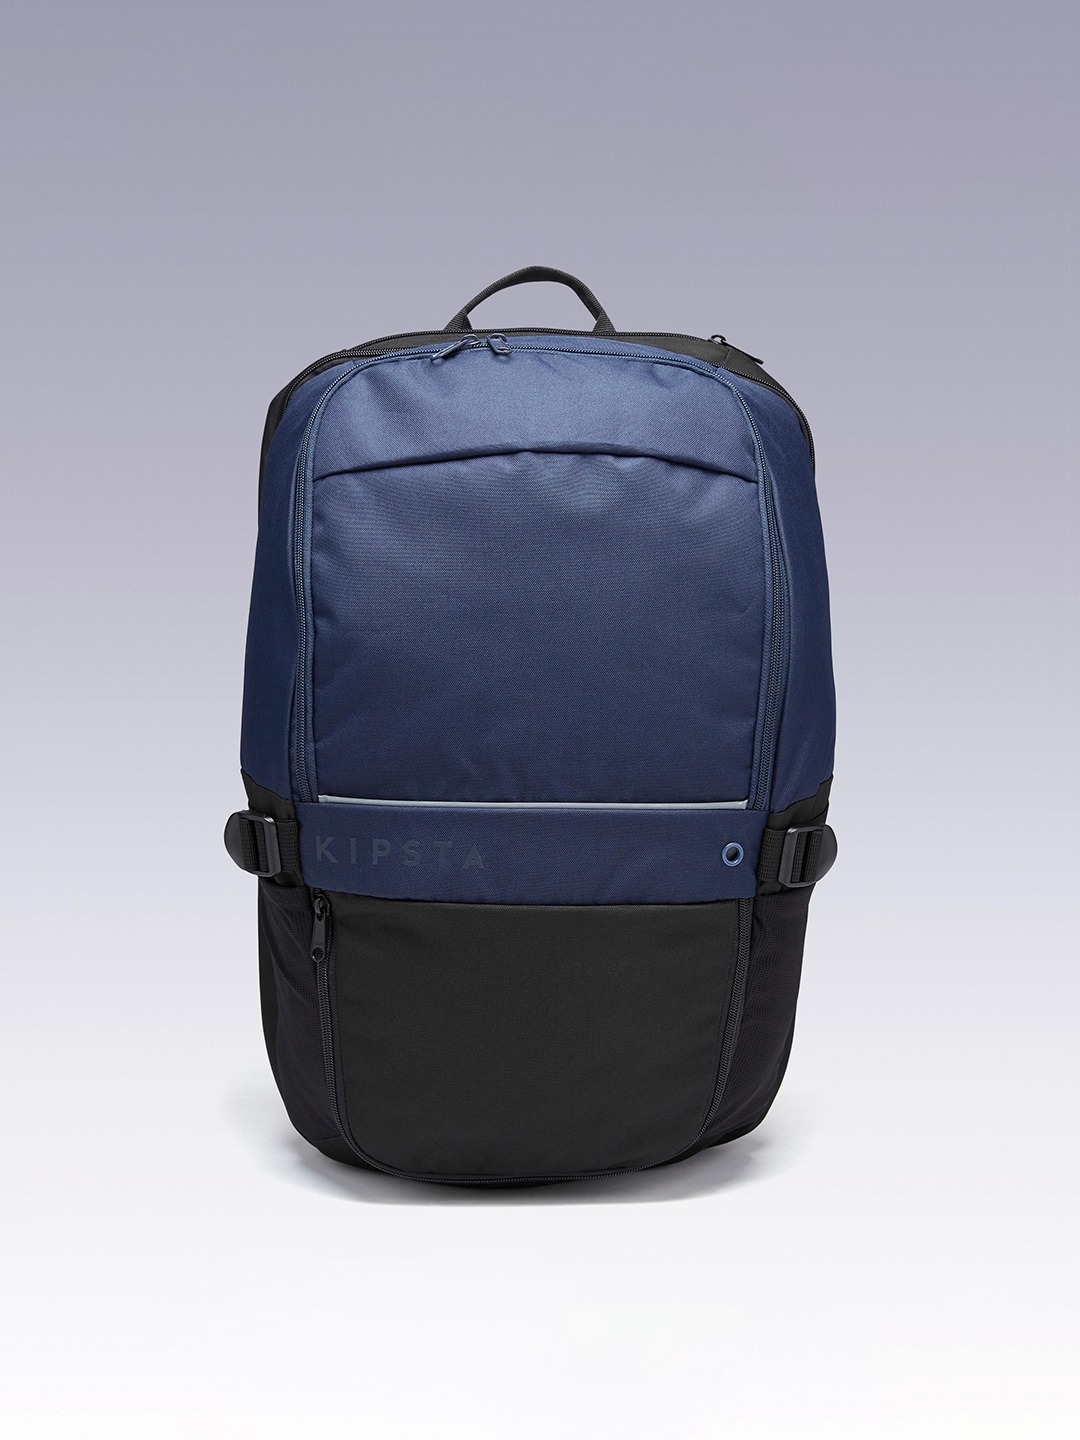 Accessories Backpacks | Kipsta By Decathlon Unisex Blue & Black Colourblocked Backpack with Shoe Pocket - QU95925